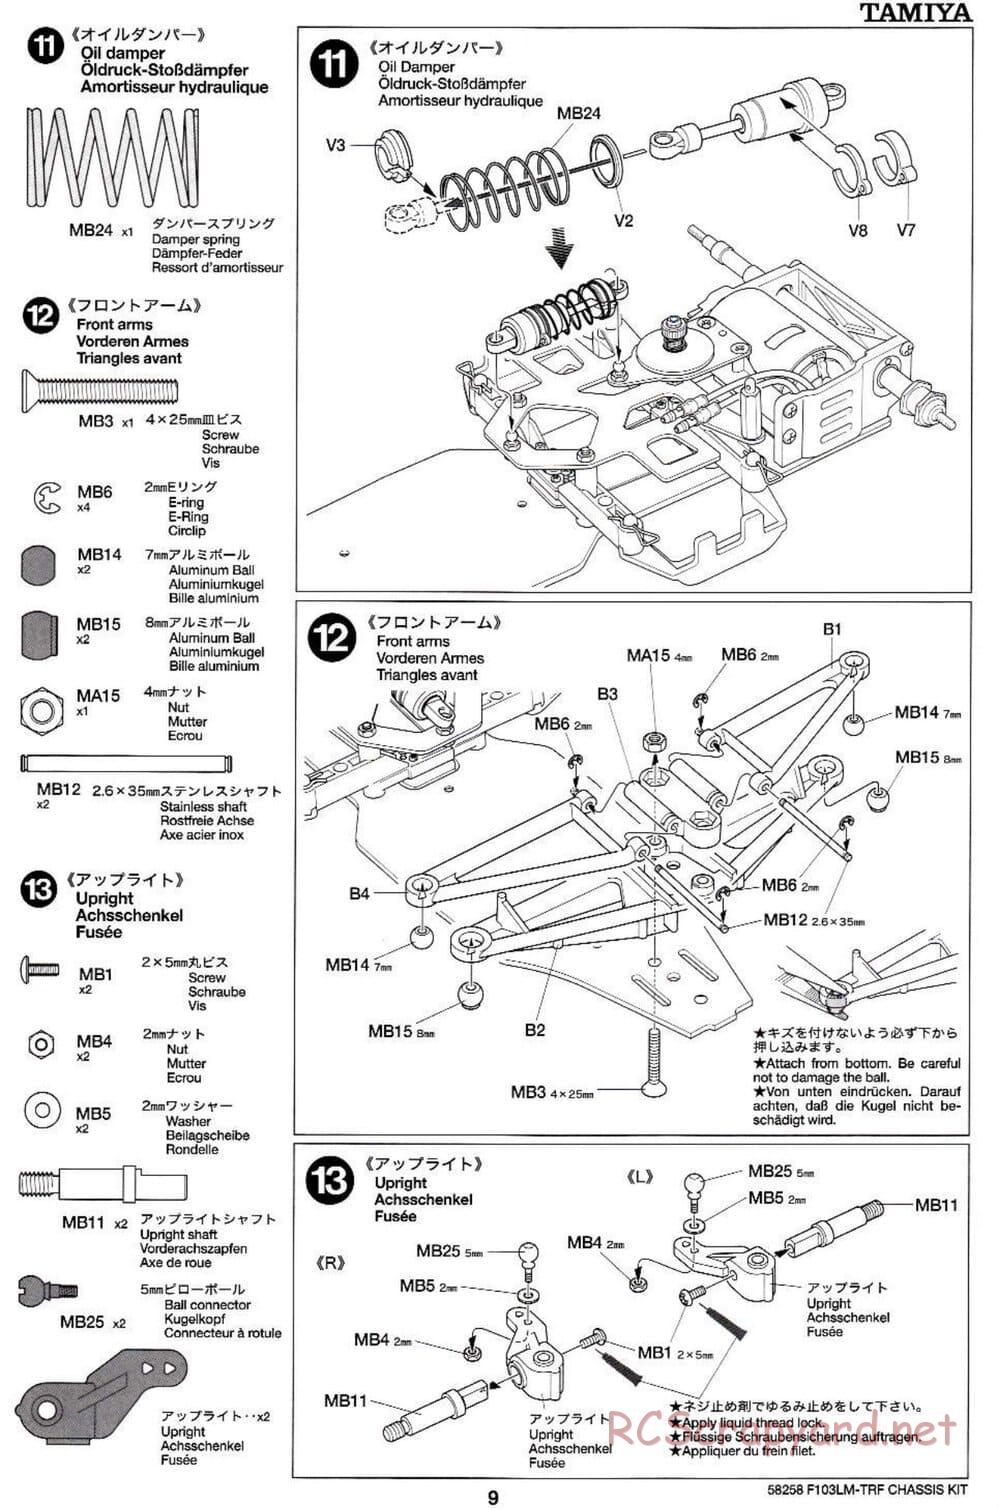 Tamiya - F103LM TRF Special Chassis - Manual - Page 9